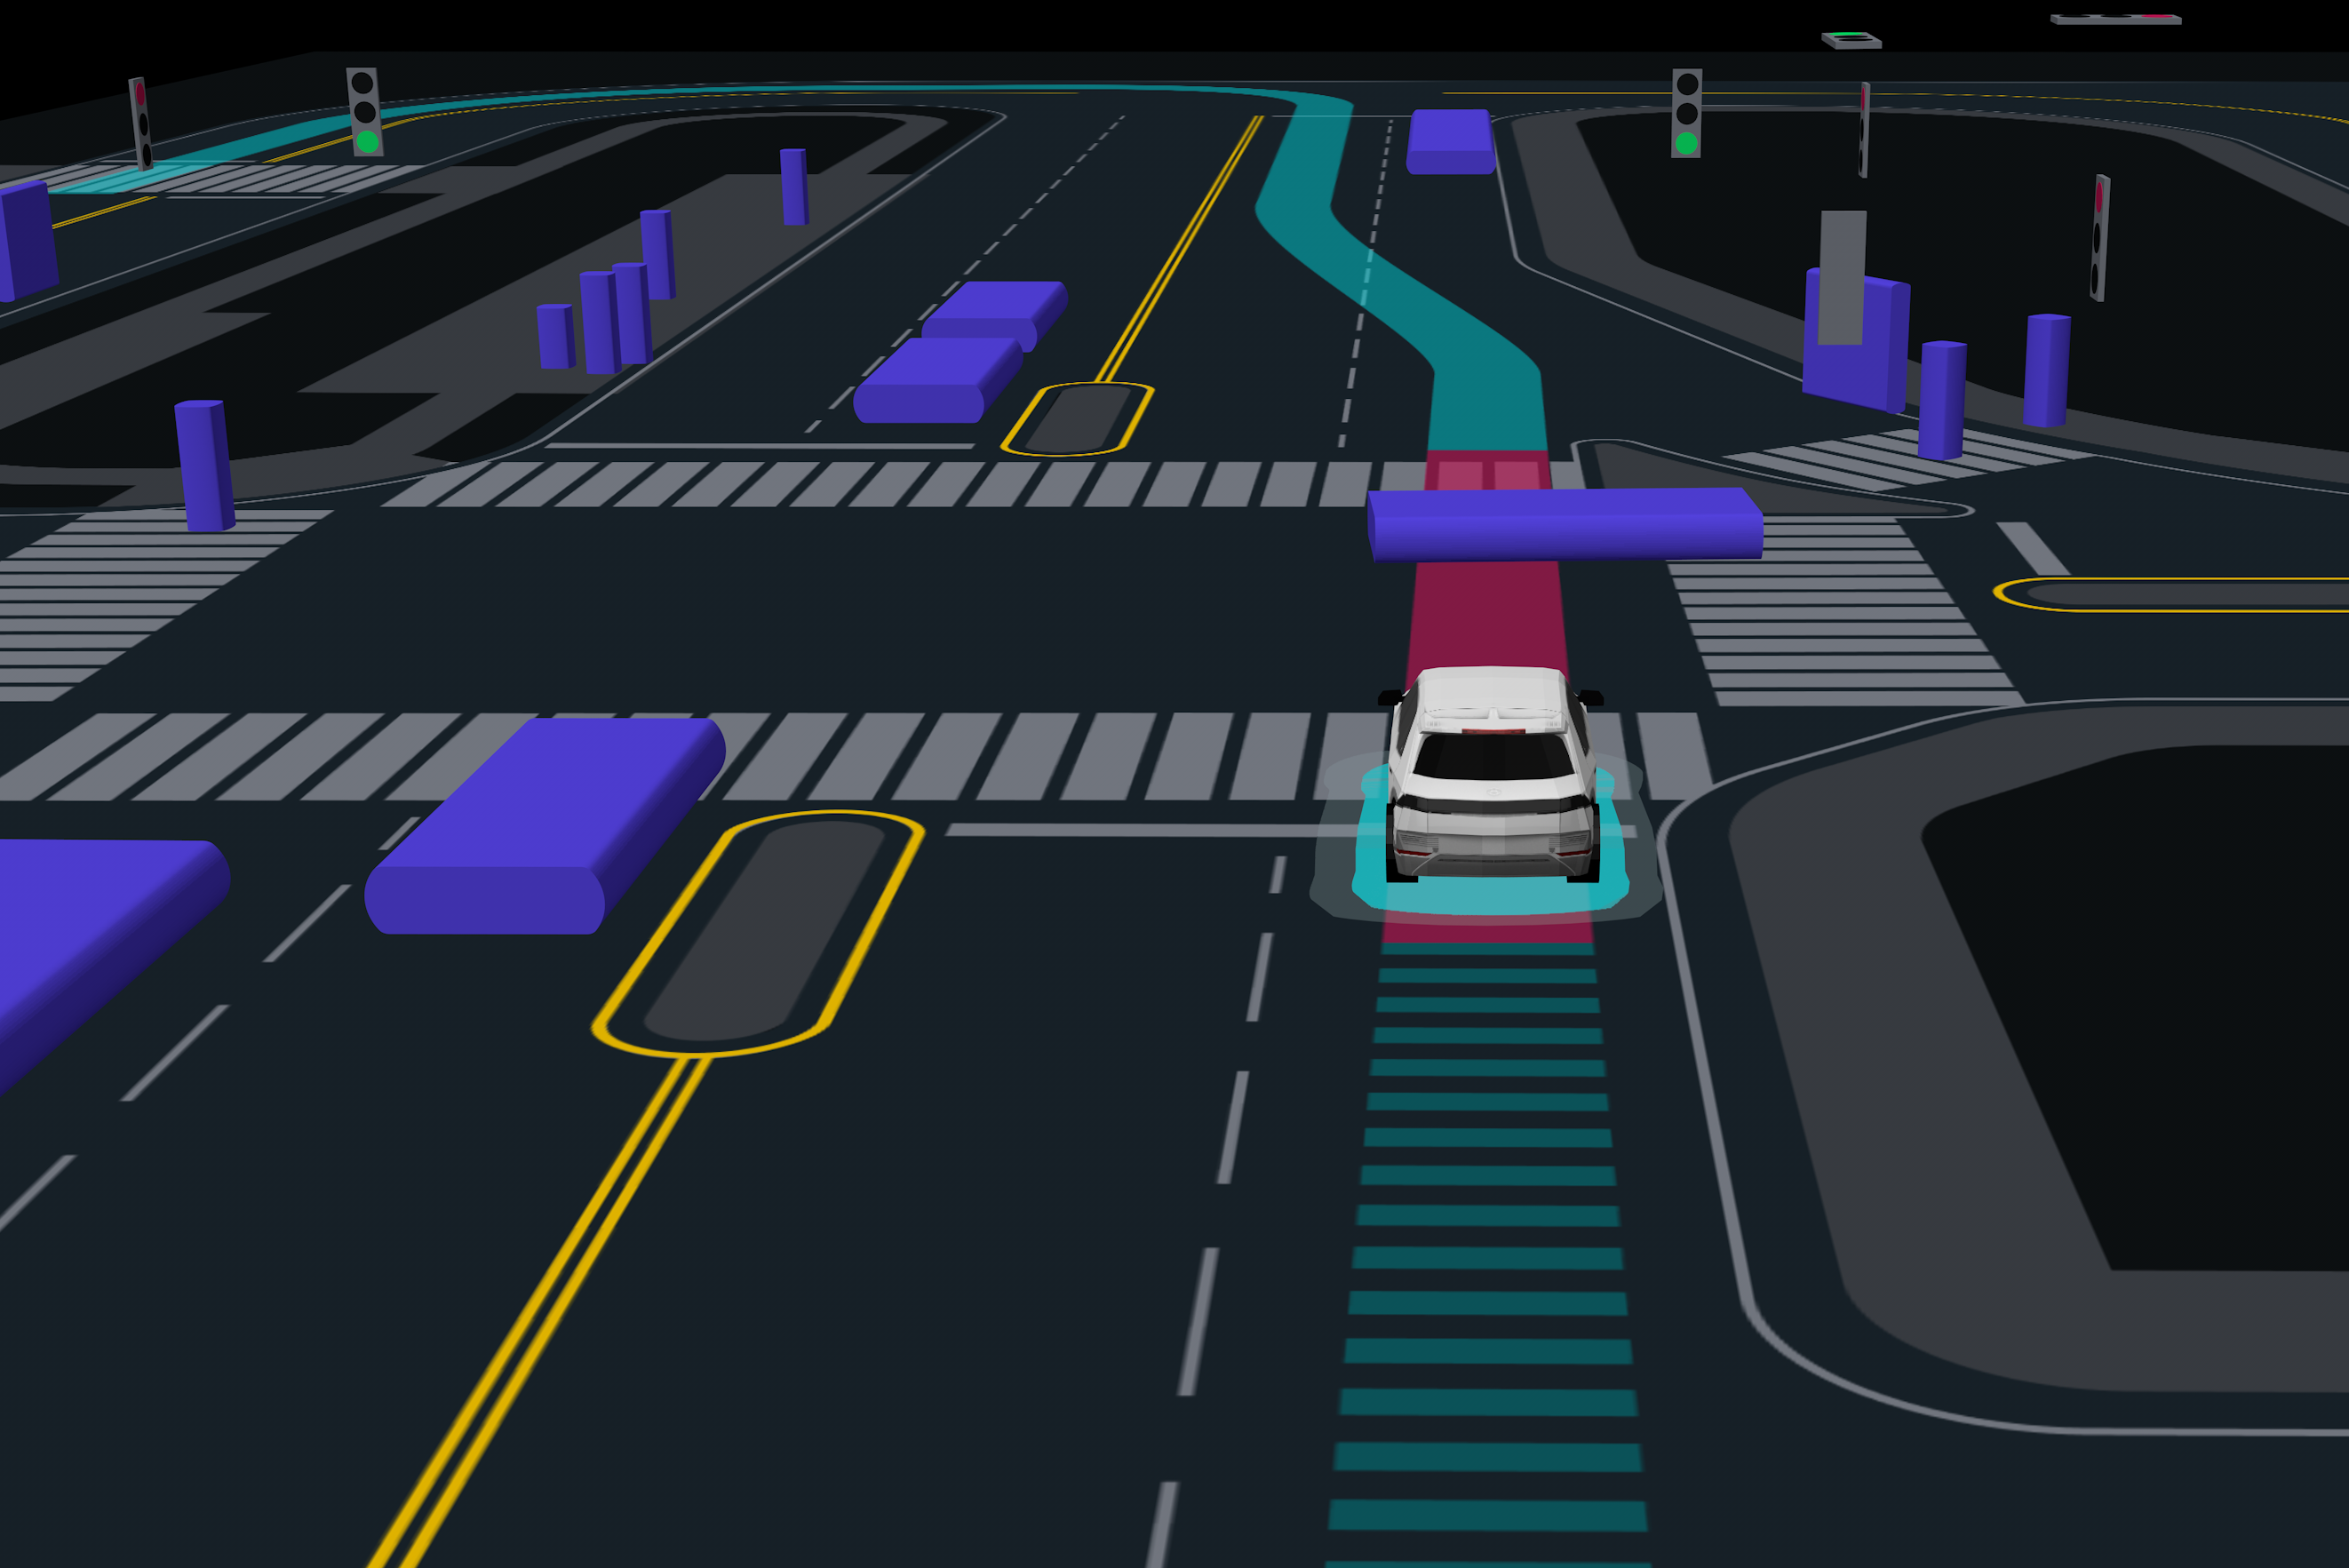 A 3D graphic showing the AV's path forward blocked by another vehicle